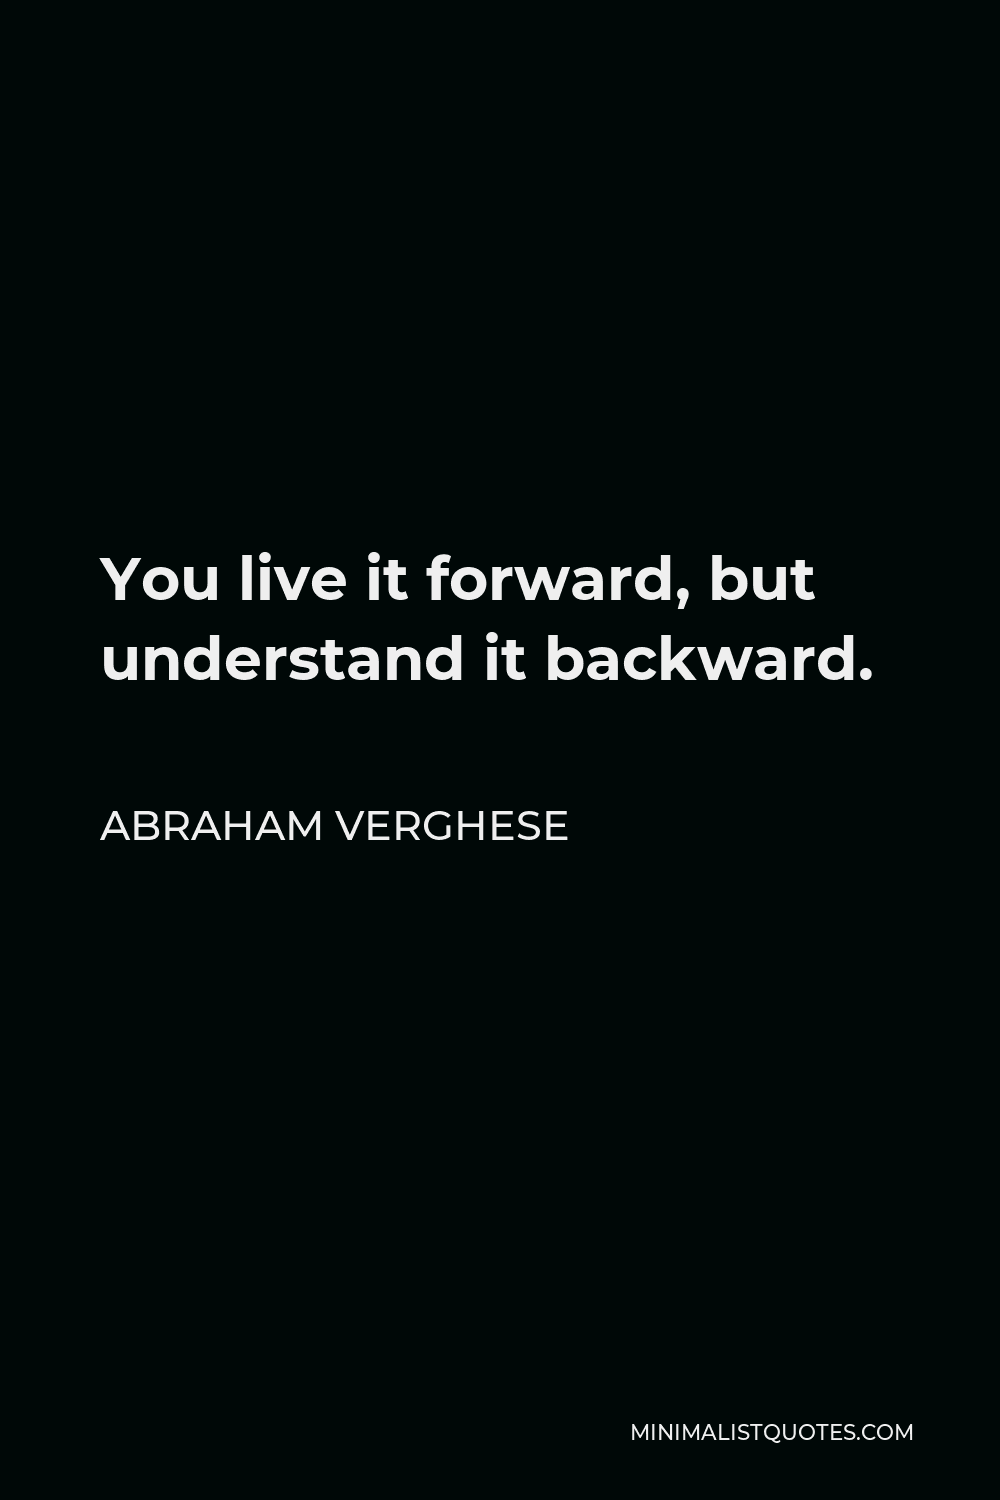 Abraham Verghese Quote - You live it forward, but understand it backward.